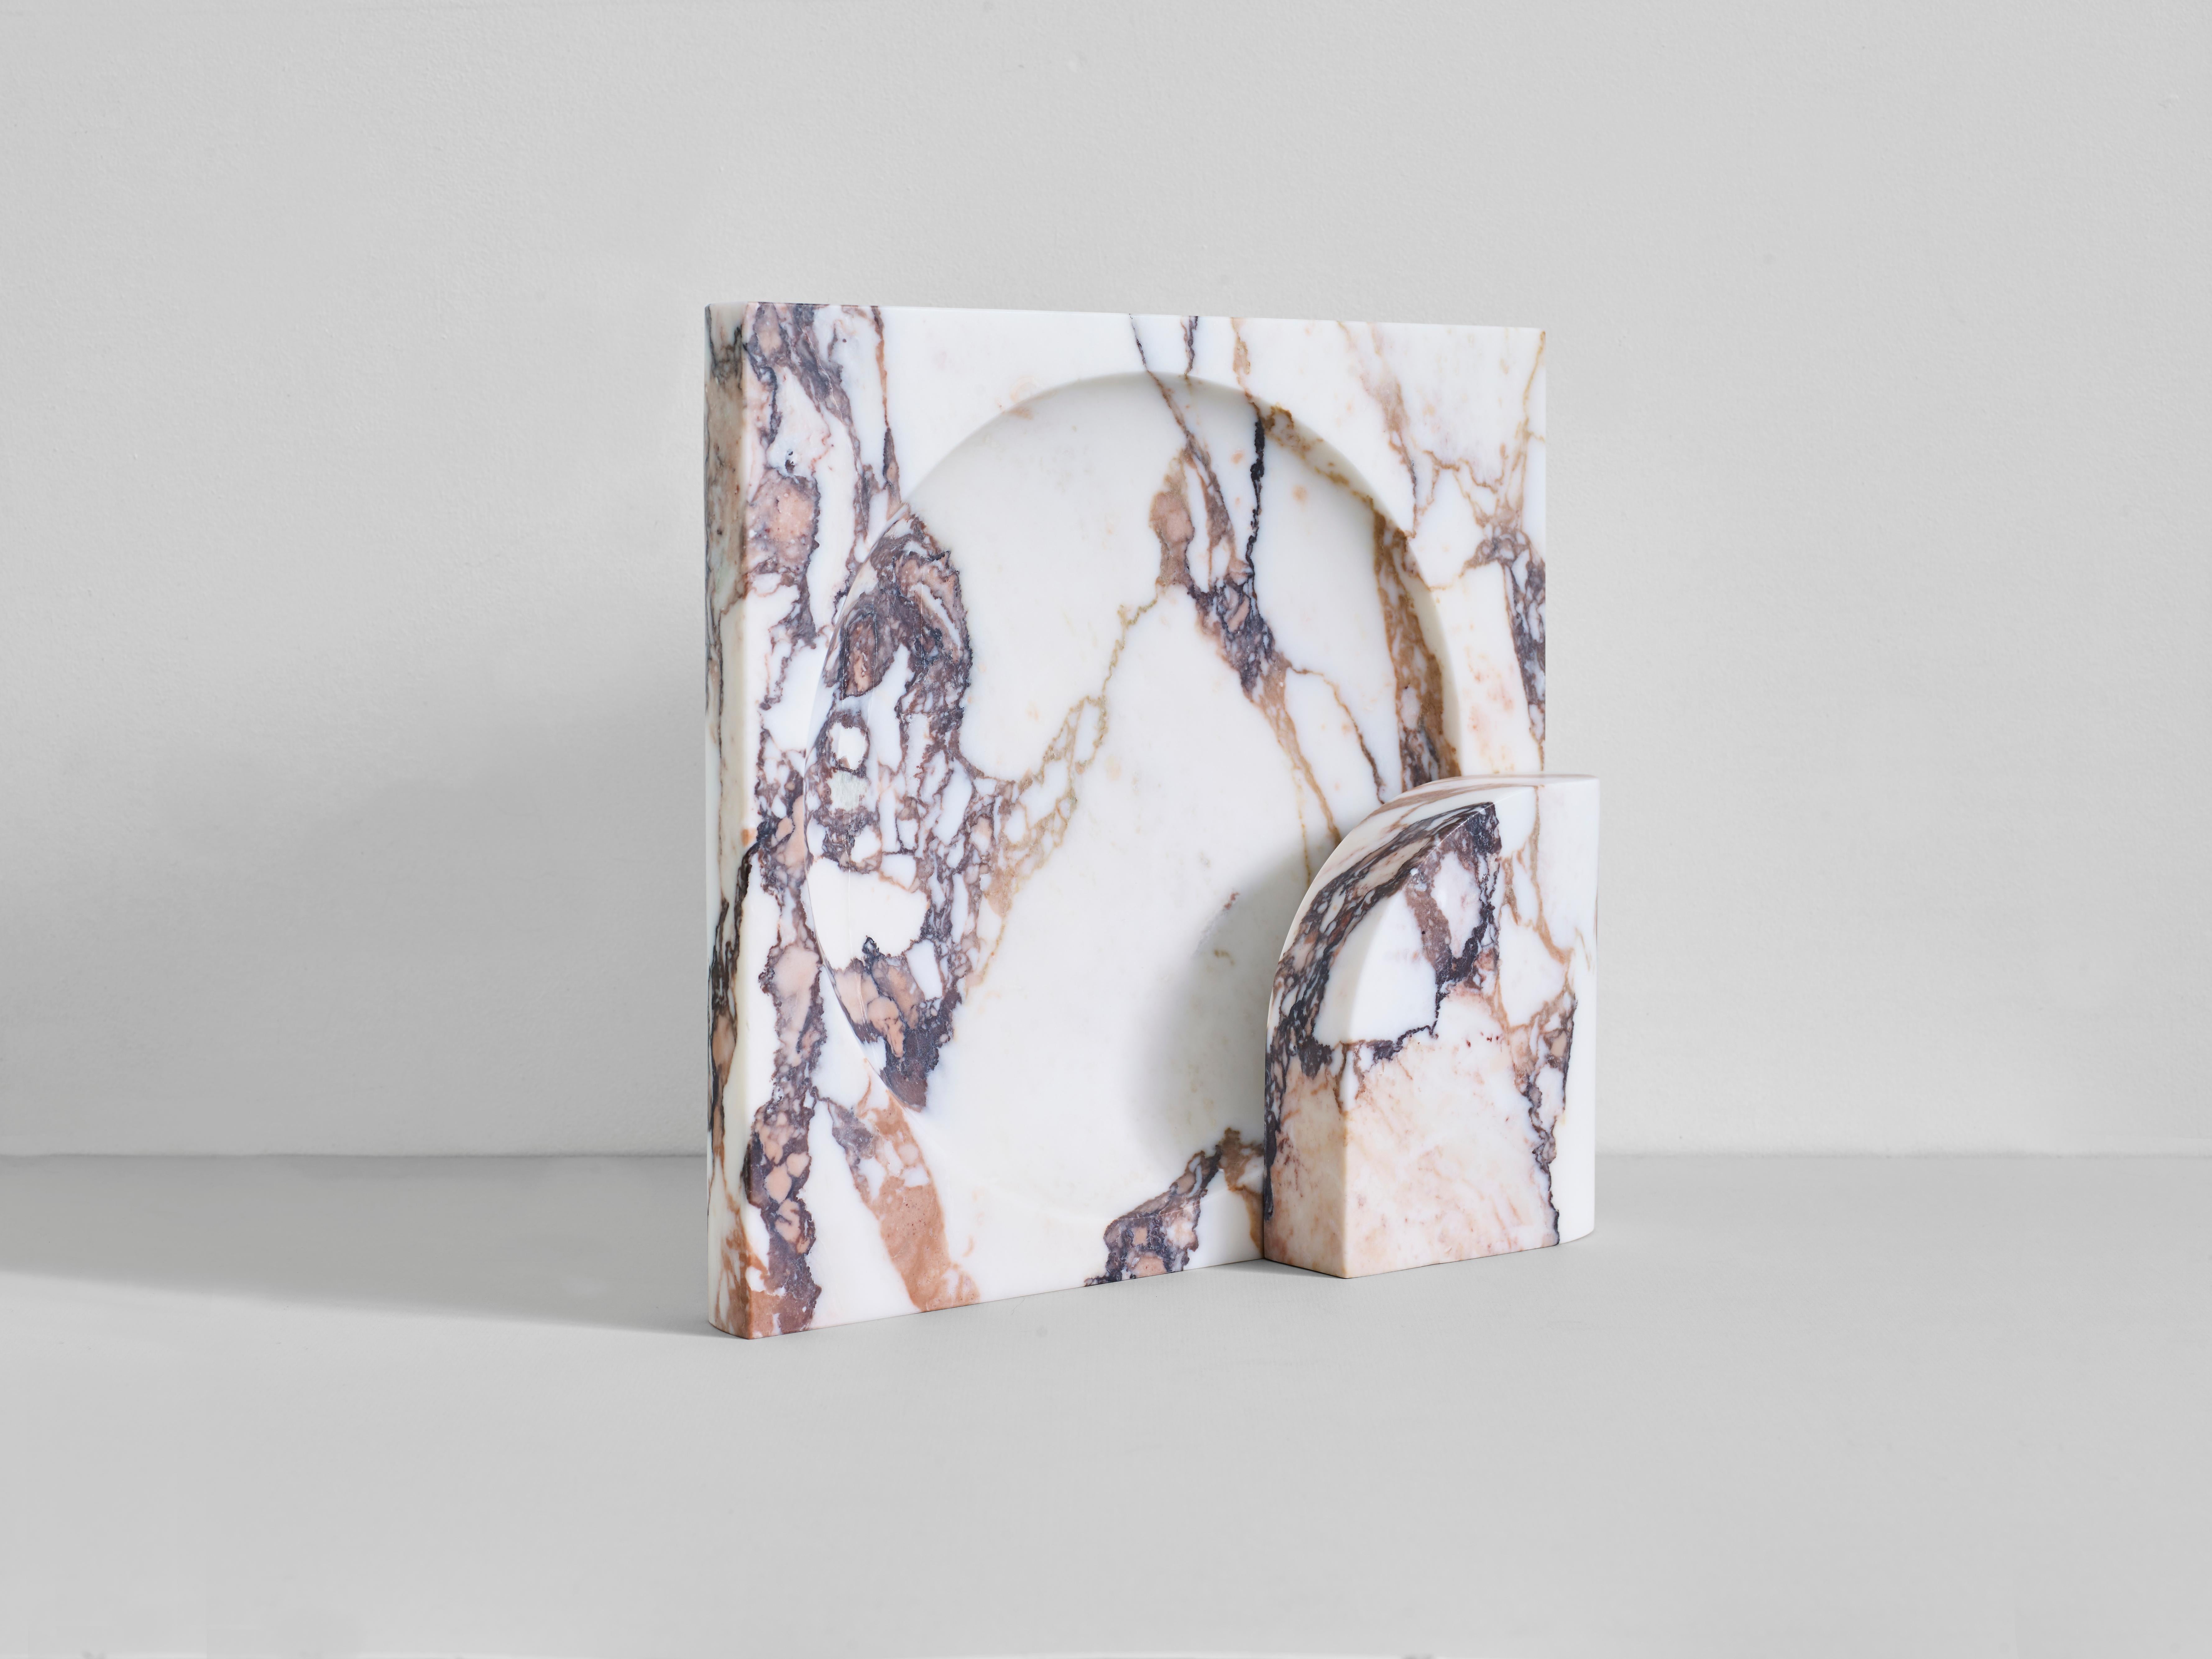 Block sconce in Calacatta Viola Marble by Henry Wilson
This sculptural item is handmade in Sydney, Australia.

The block sconce in Calacatta Viola marble is a two-piece stone light with captured bulb. Concealed mounting plate fixes the front and